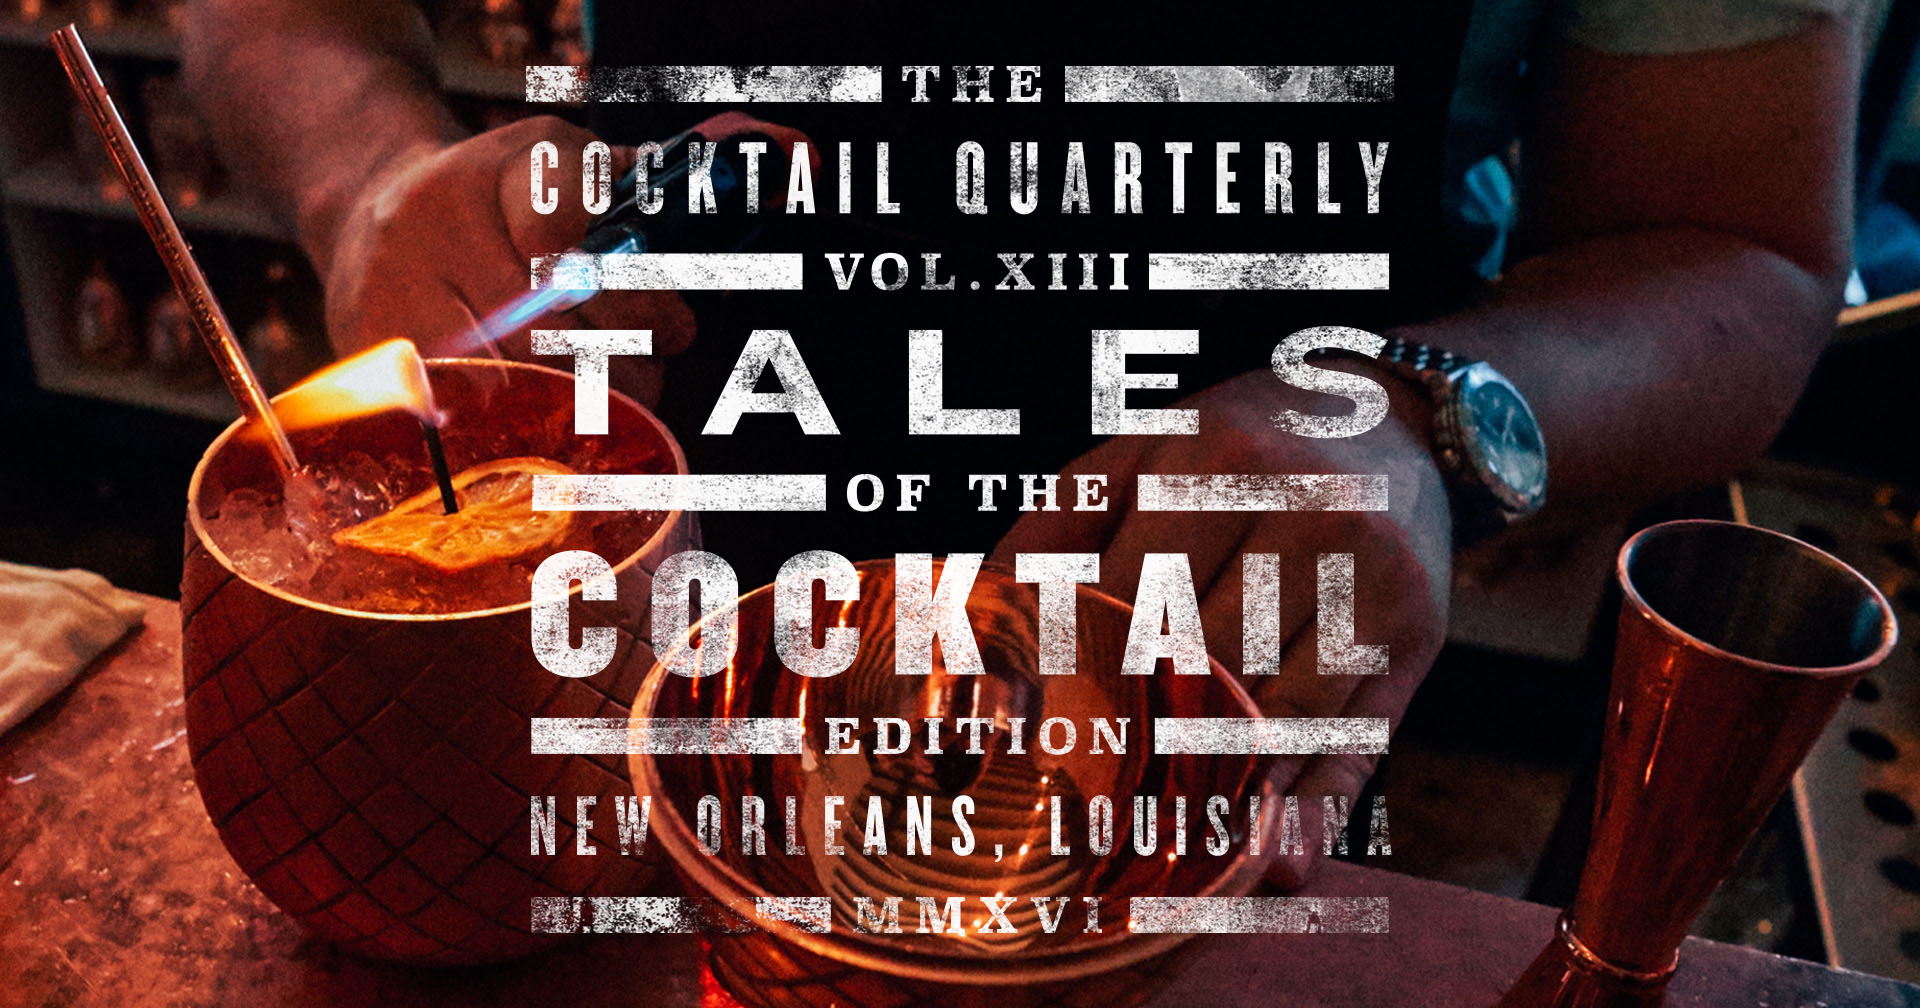 The Cocktail Quarterly Vol. XIII